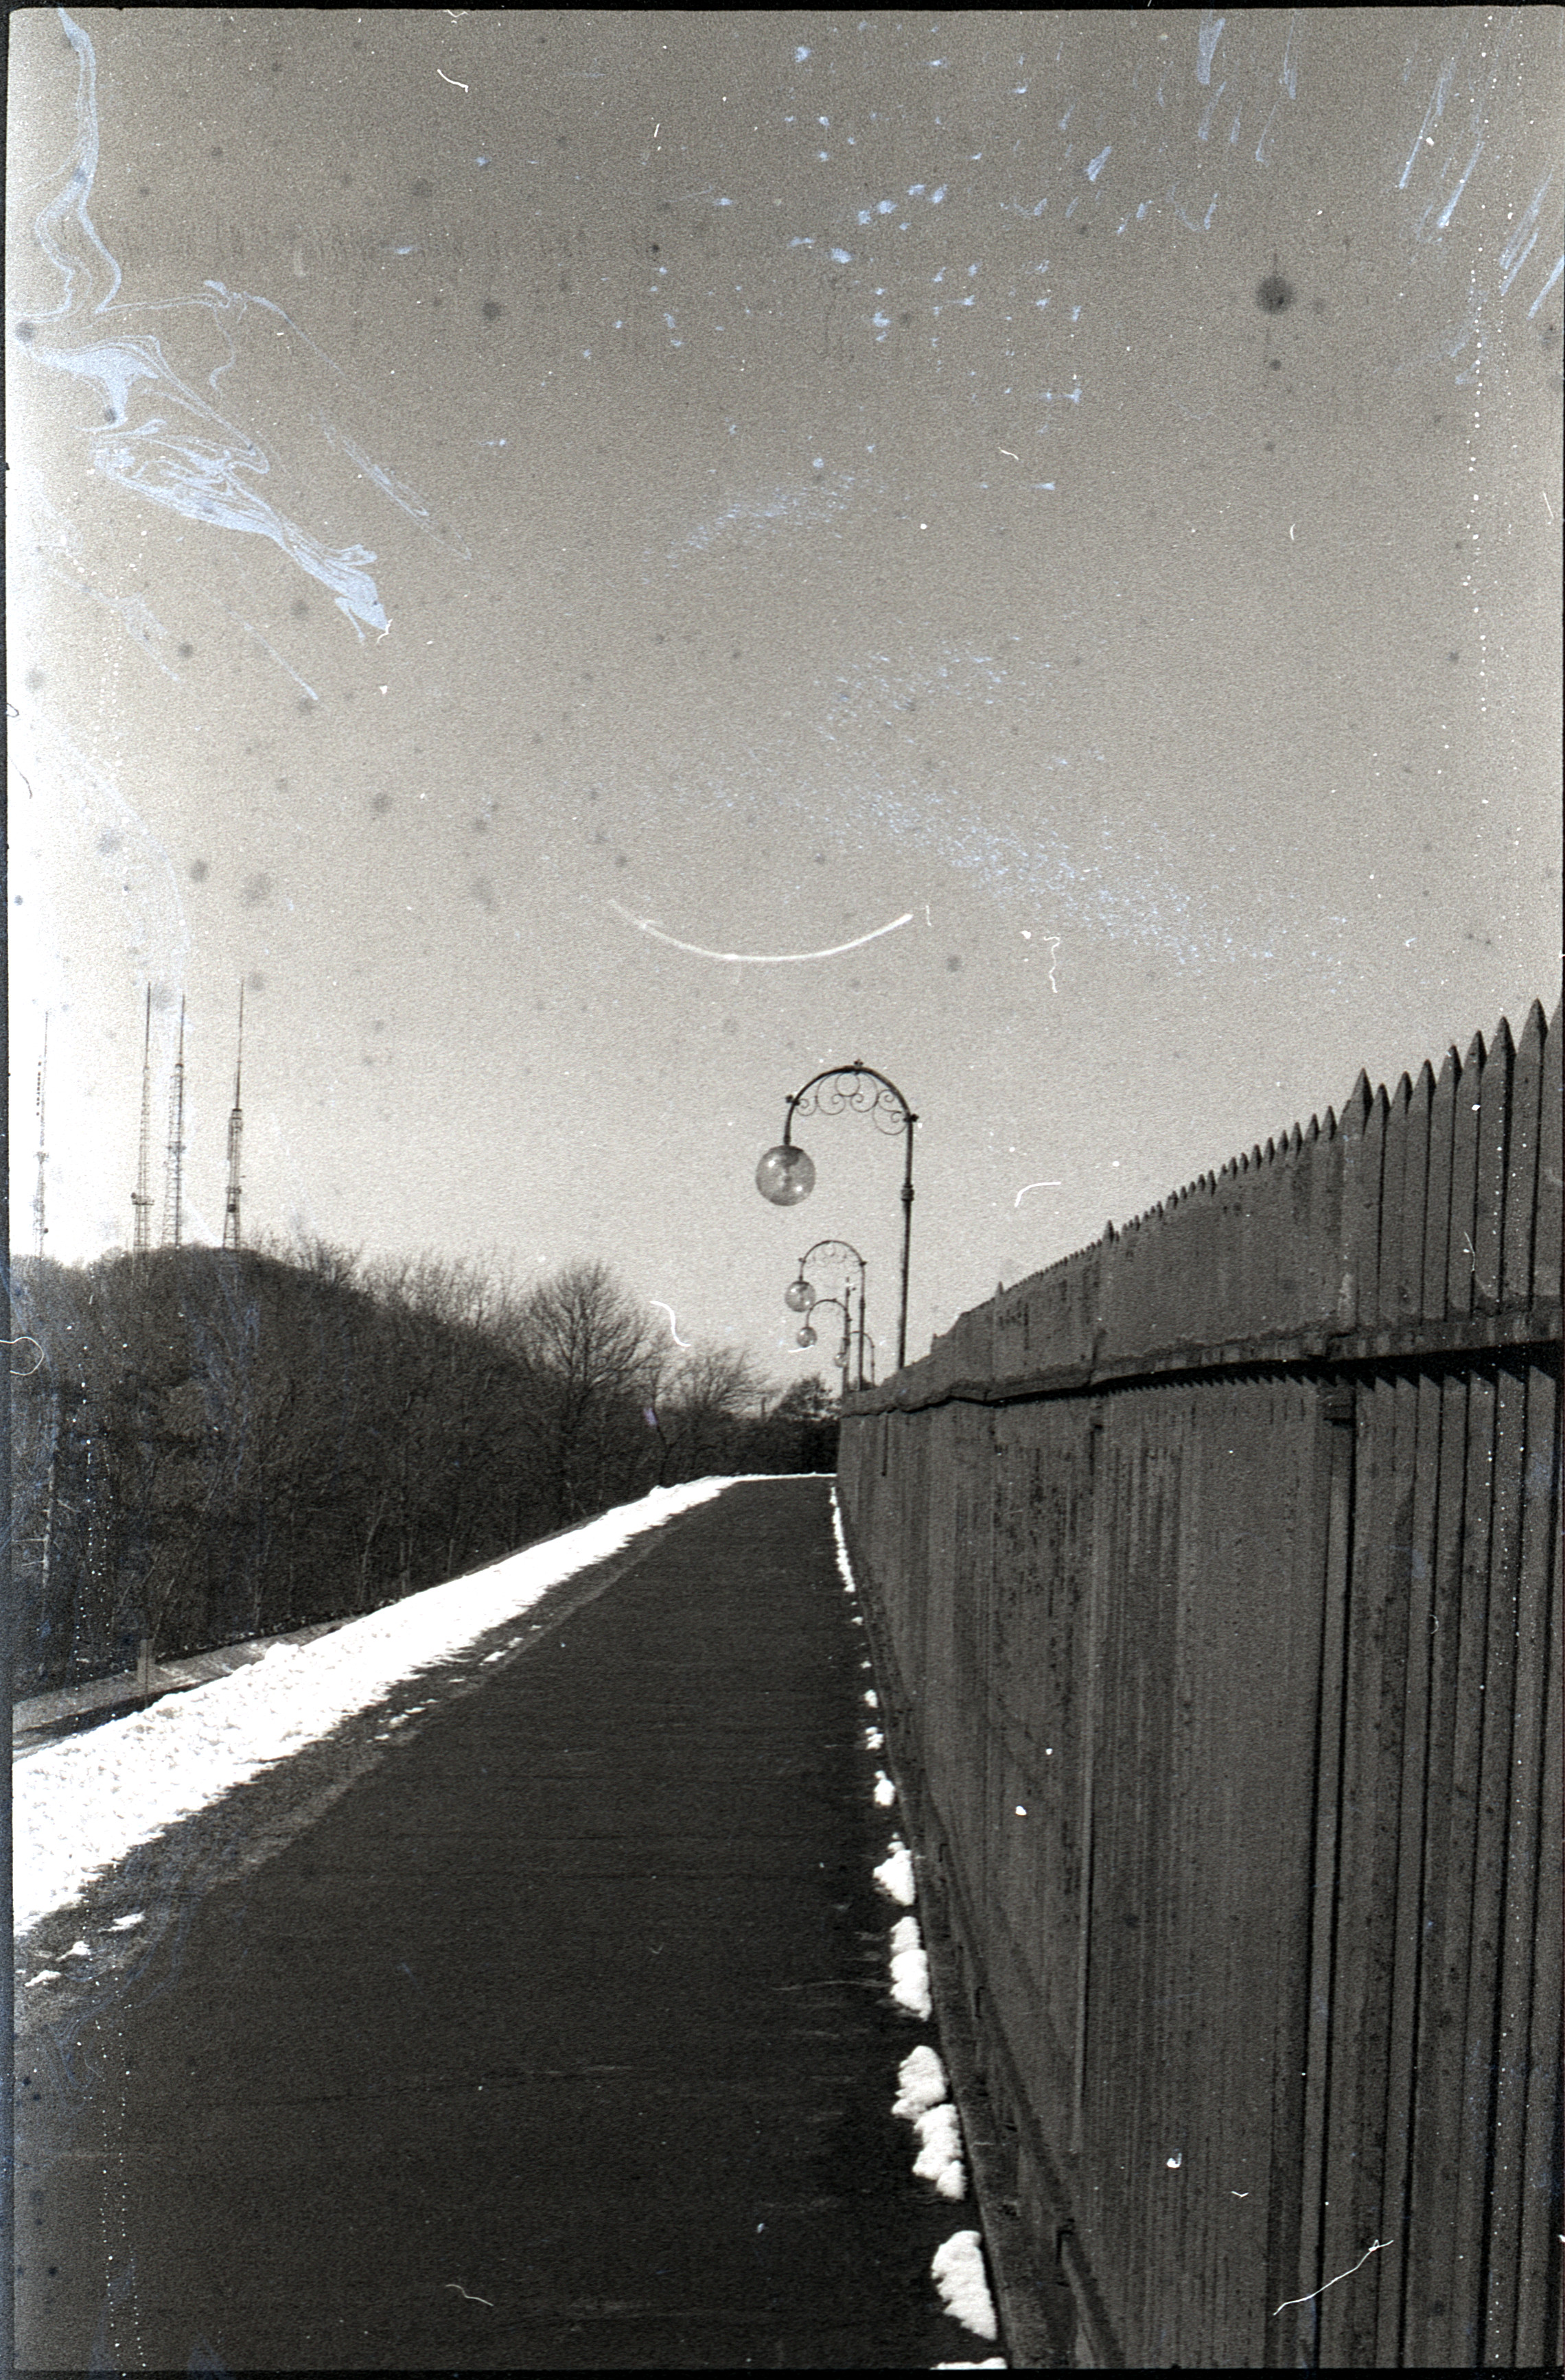 photo, black and white with significant film artifacting: a sidewalk next to a fence with spherical streetlamps hanging over it
off in the background, the hill with four radio towers is visible